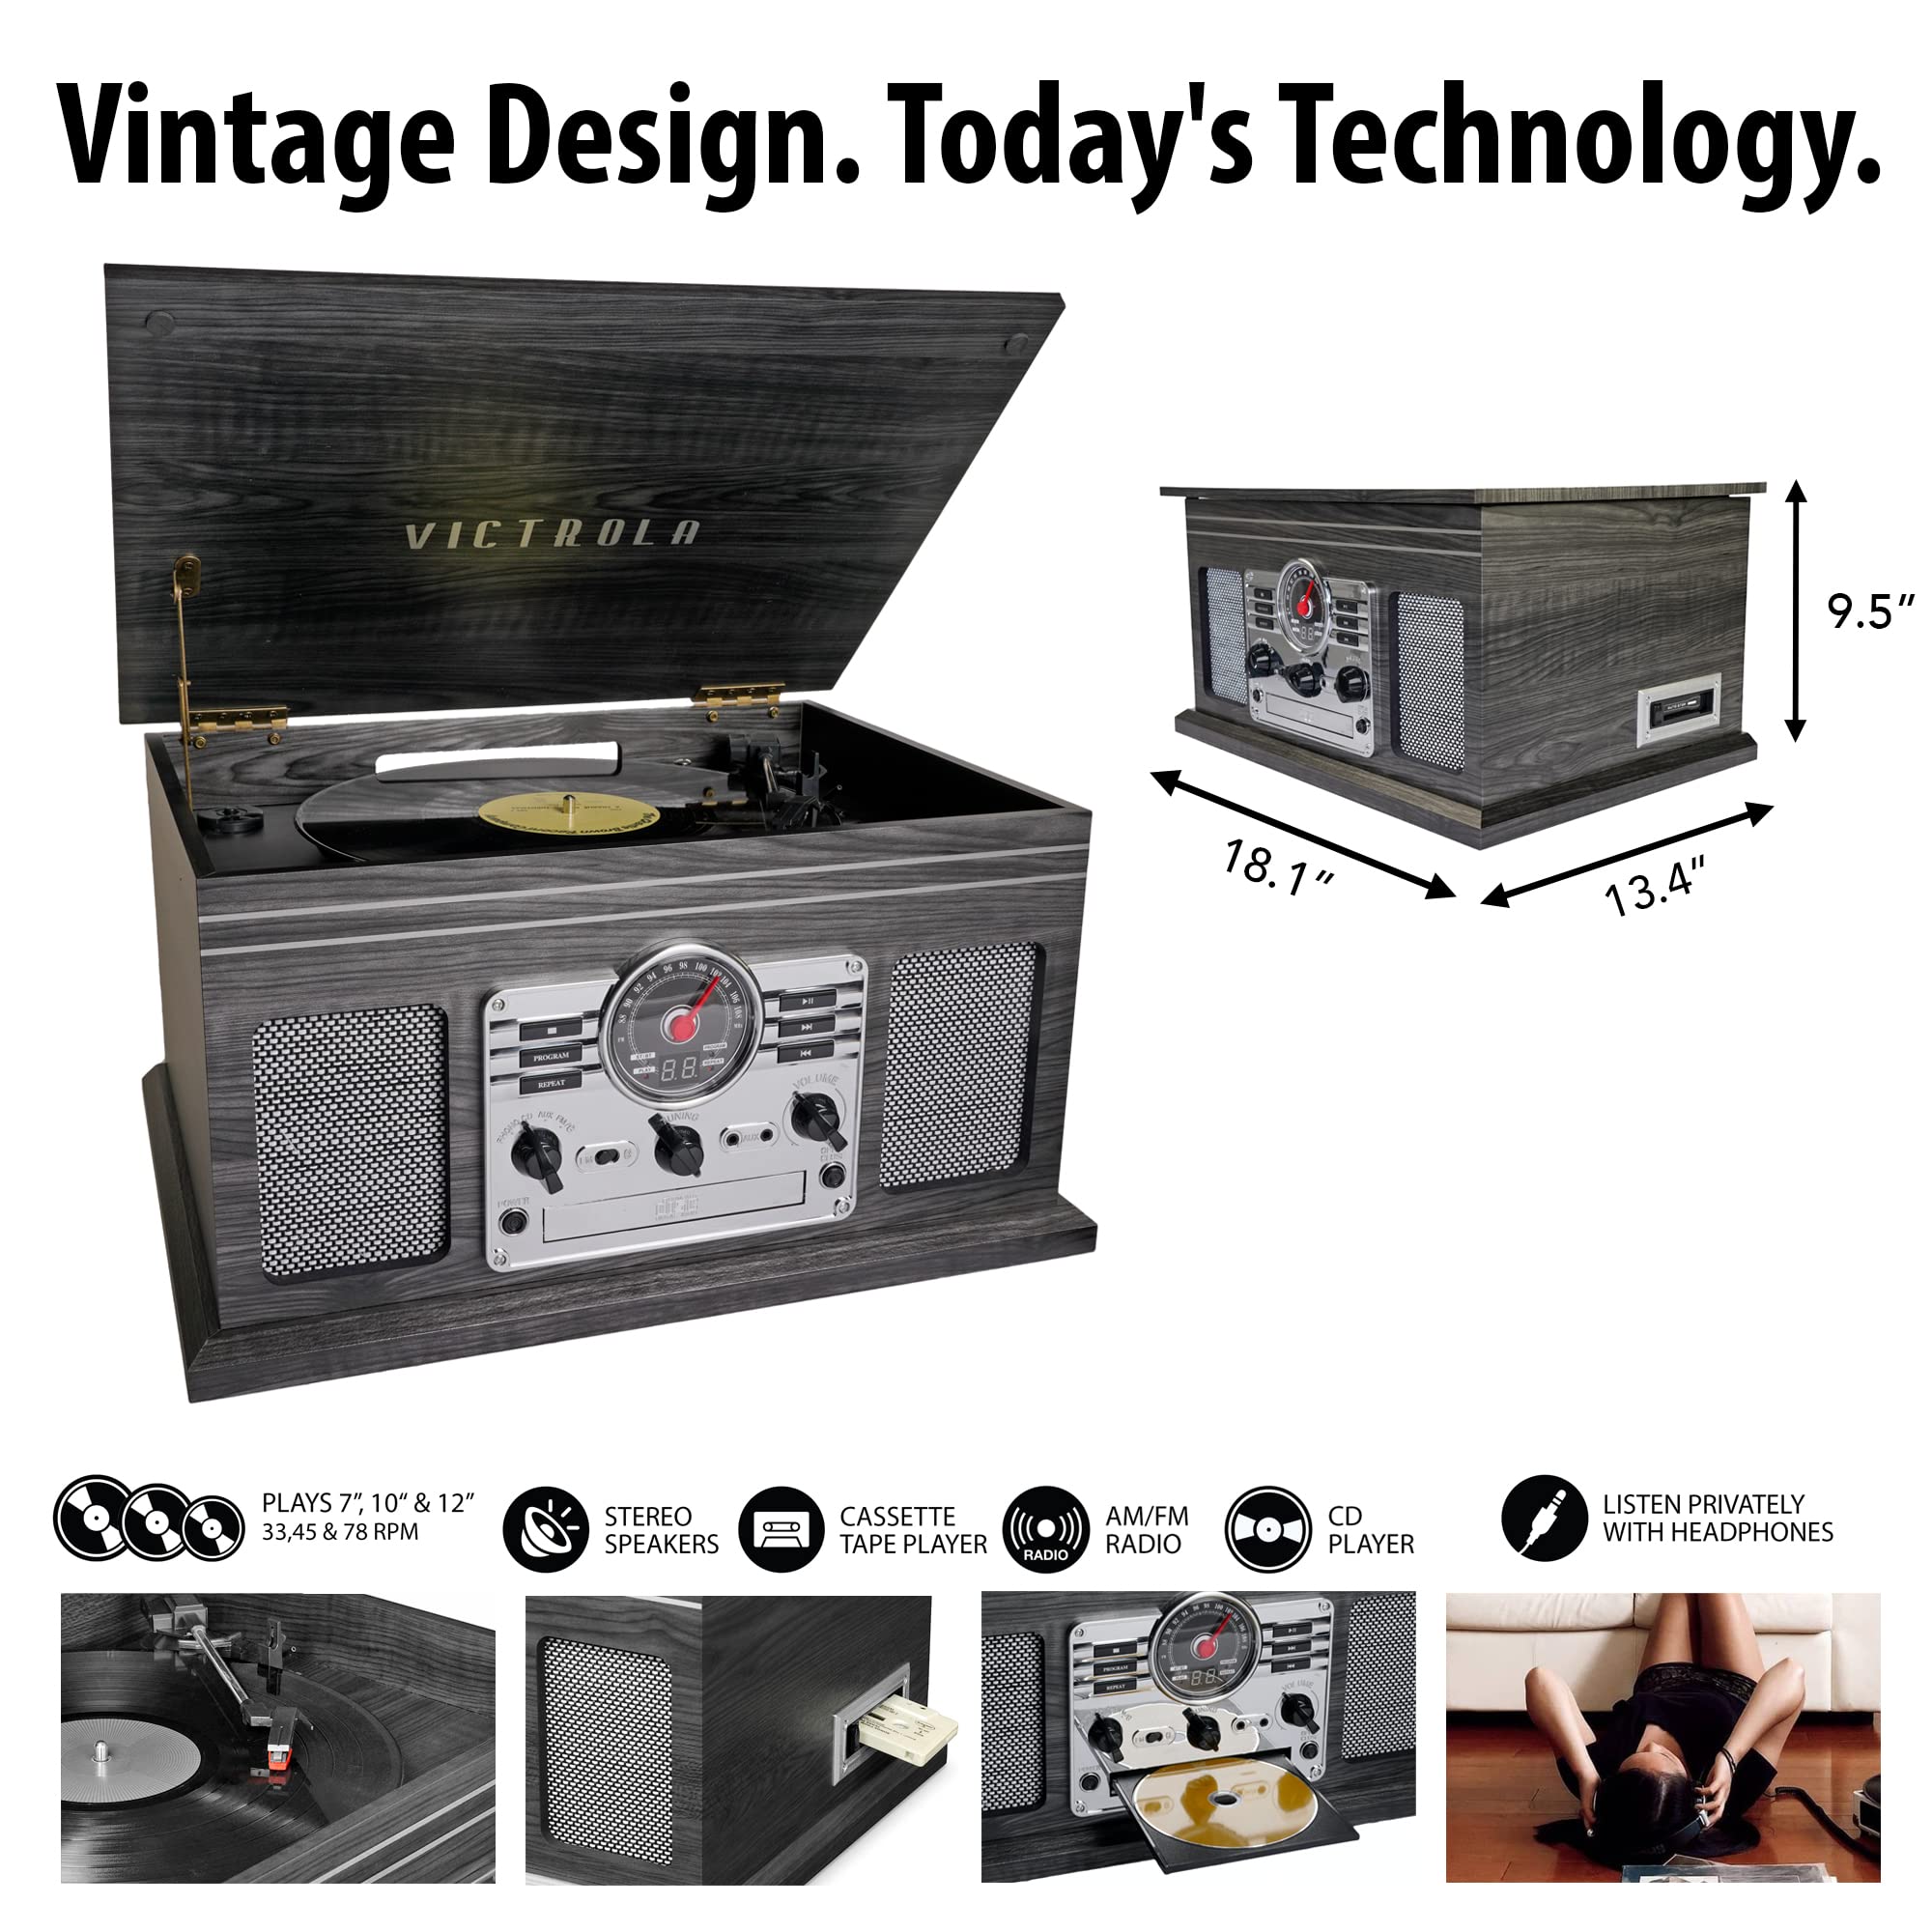 Victrola Nostalgic 6-in-1 Bluetooth Record Player & Multimedia Center with Built-in Speakers - 3-Speed Turntable, CD & Cassette Player, AM/FM Radio | Wireless Music Streaming | Grey | wood